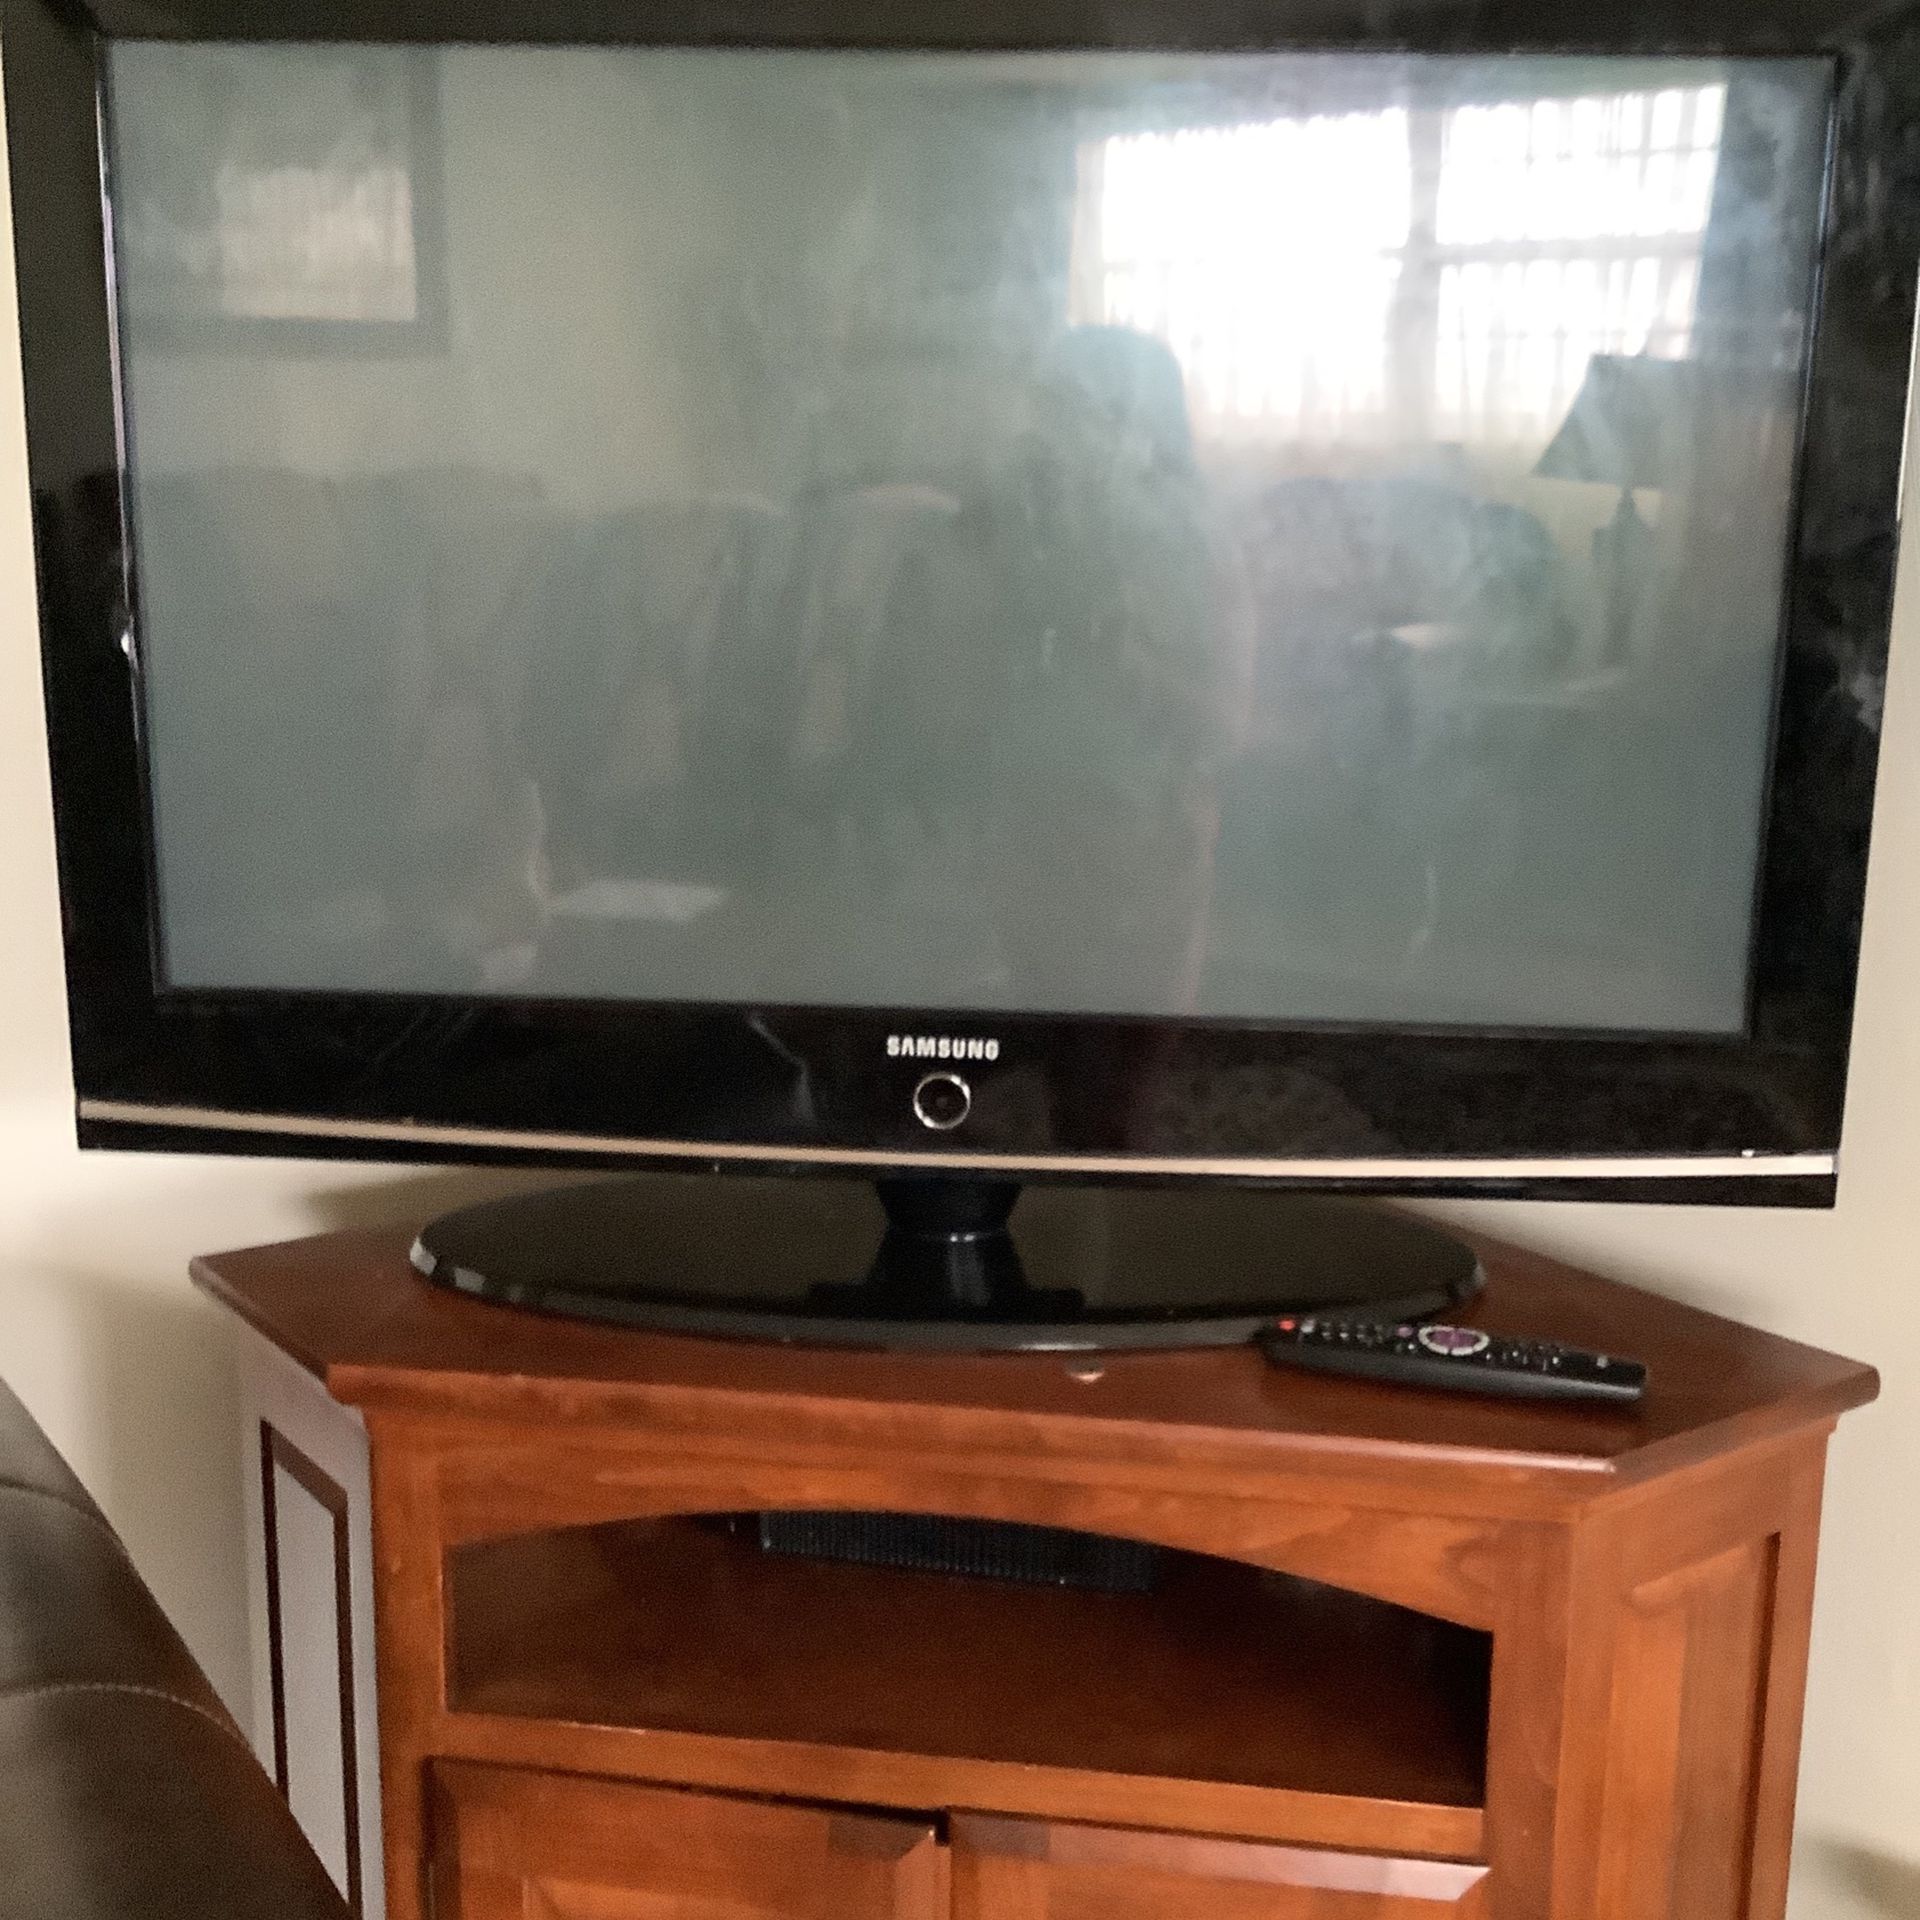 Samsung Tv With Table For Only 200